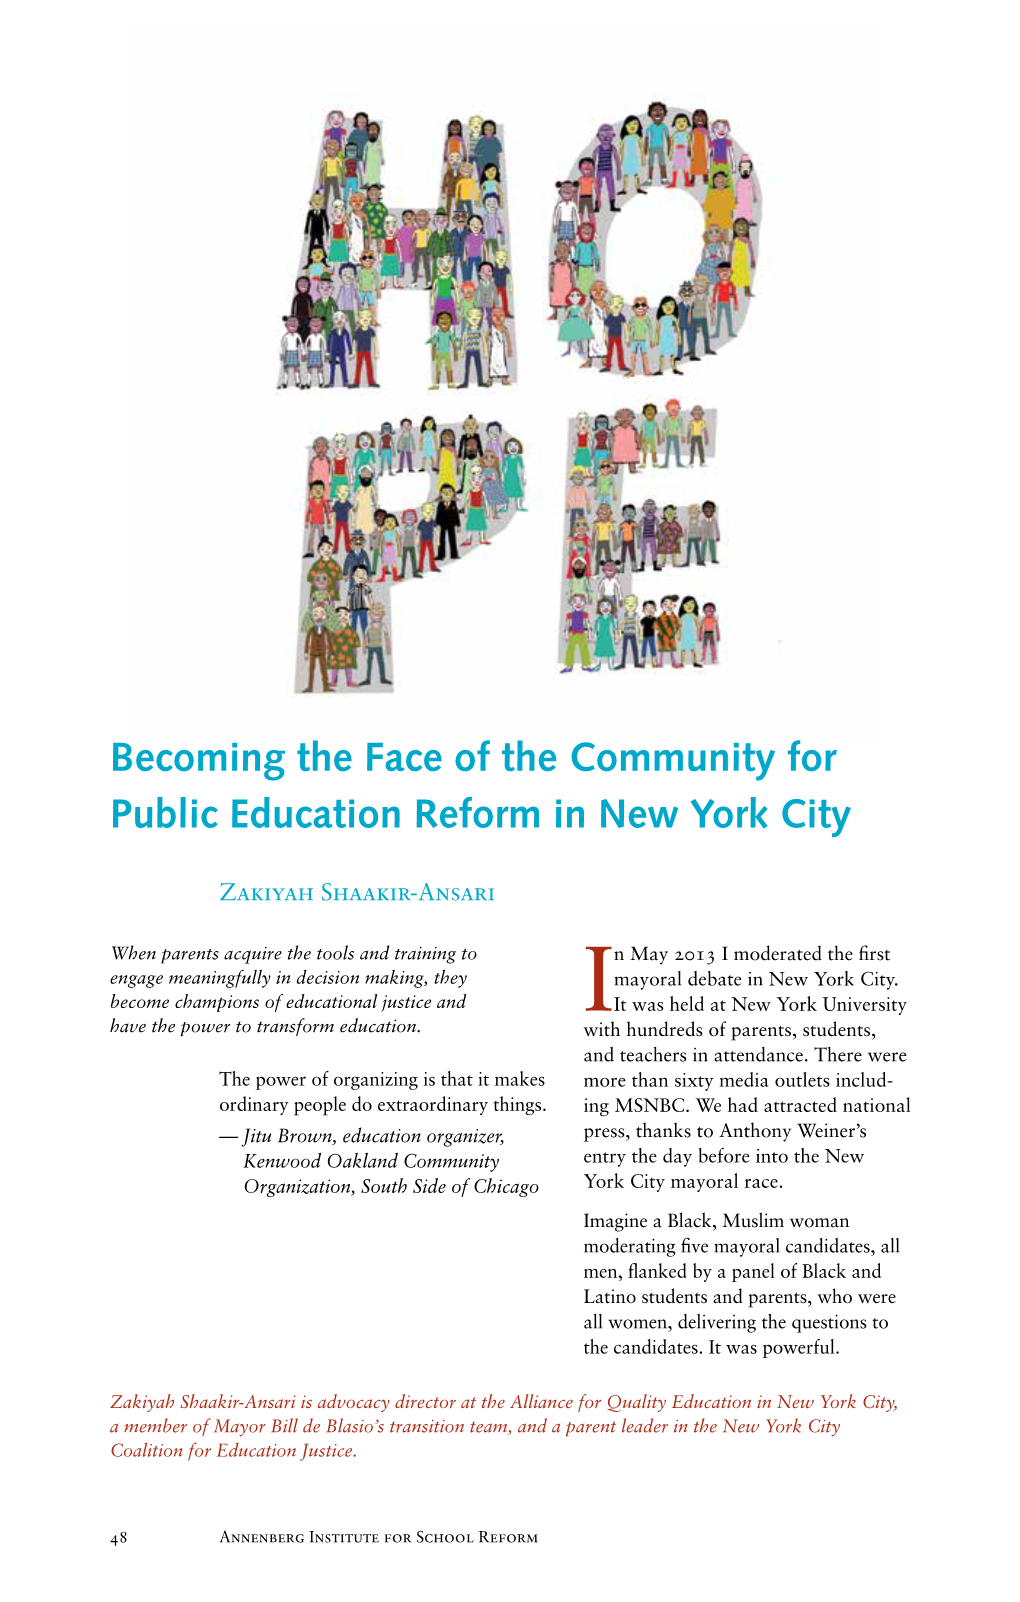 Becoming the Face of the Community for Public Education Reform in New York City